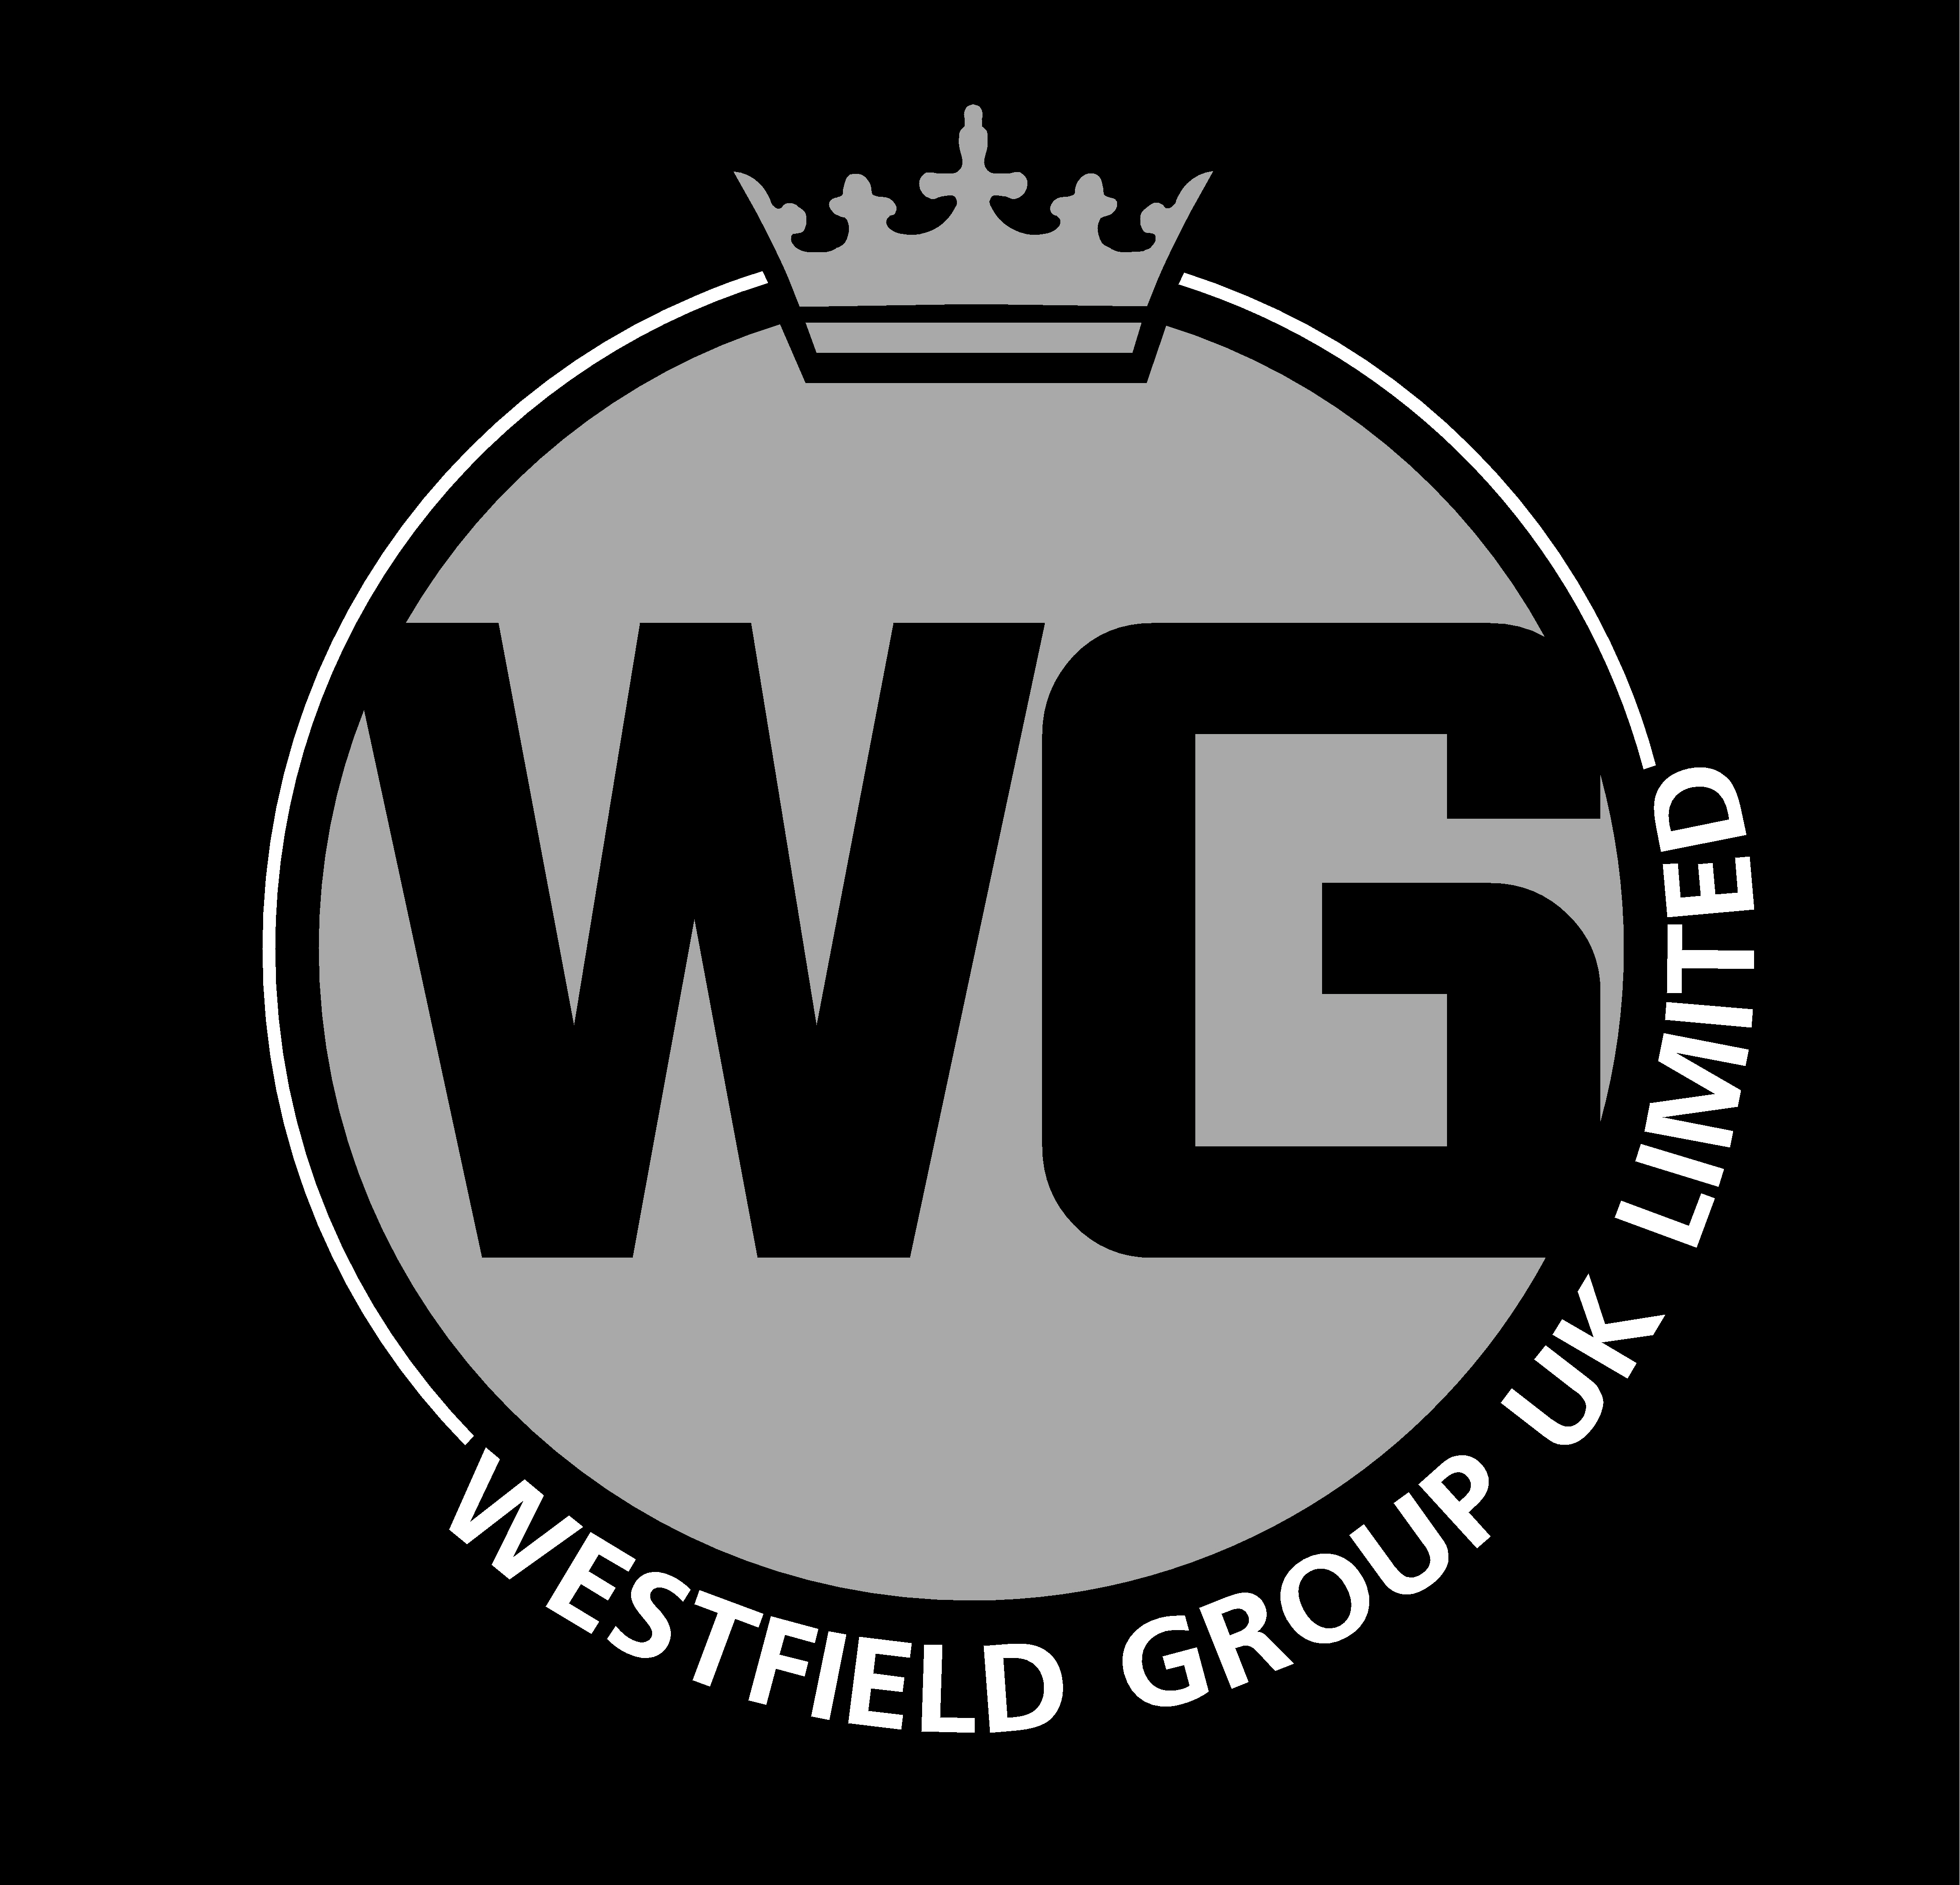 Westfield Group UK Limited